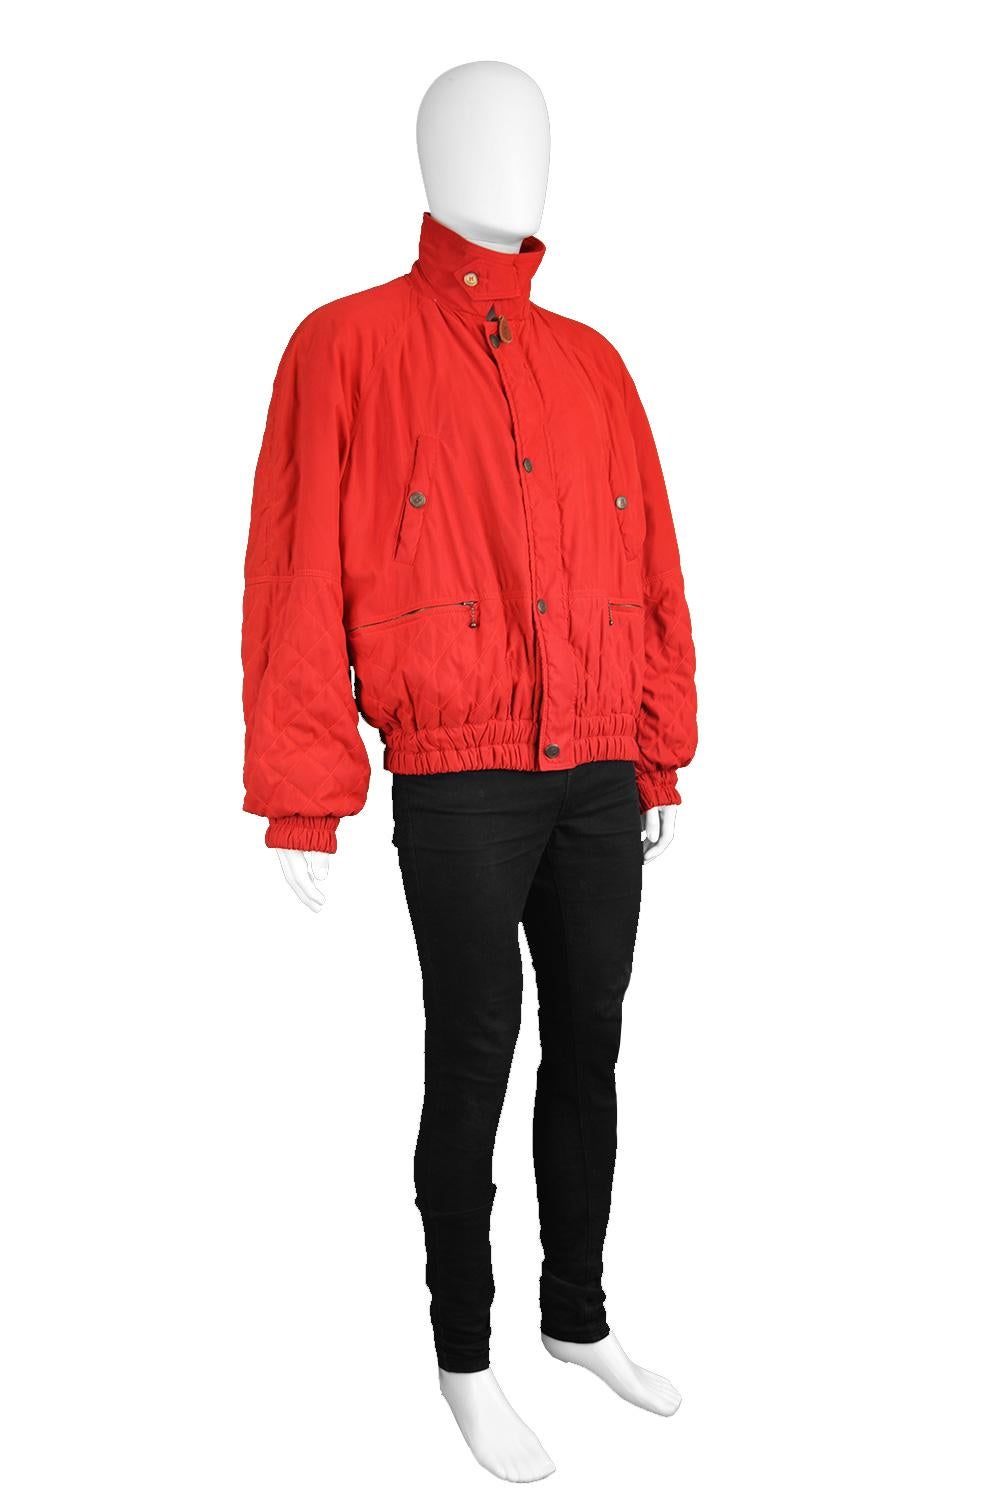 Oliver by Valentino Men's Vintage Red Quilted Bomber Jacket Coat, 1980s 3